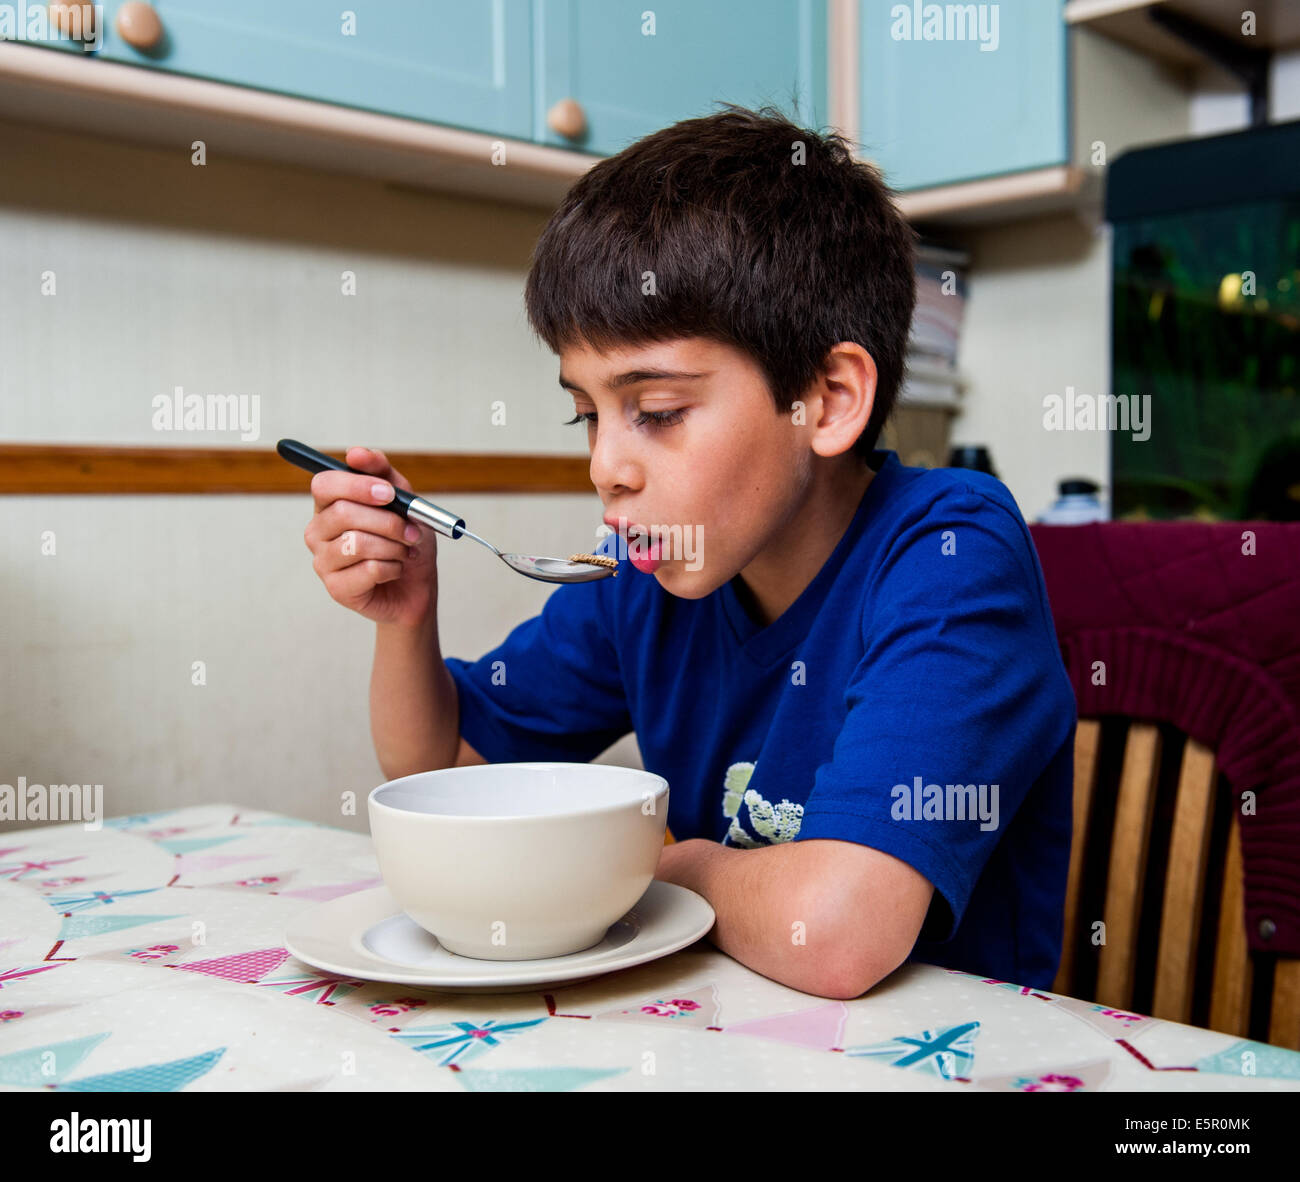 boy eating cereal Stock Photo